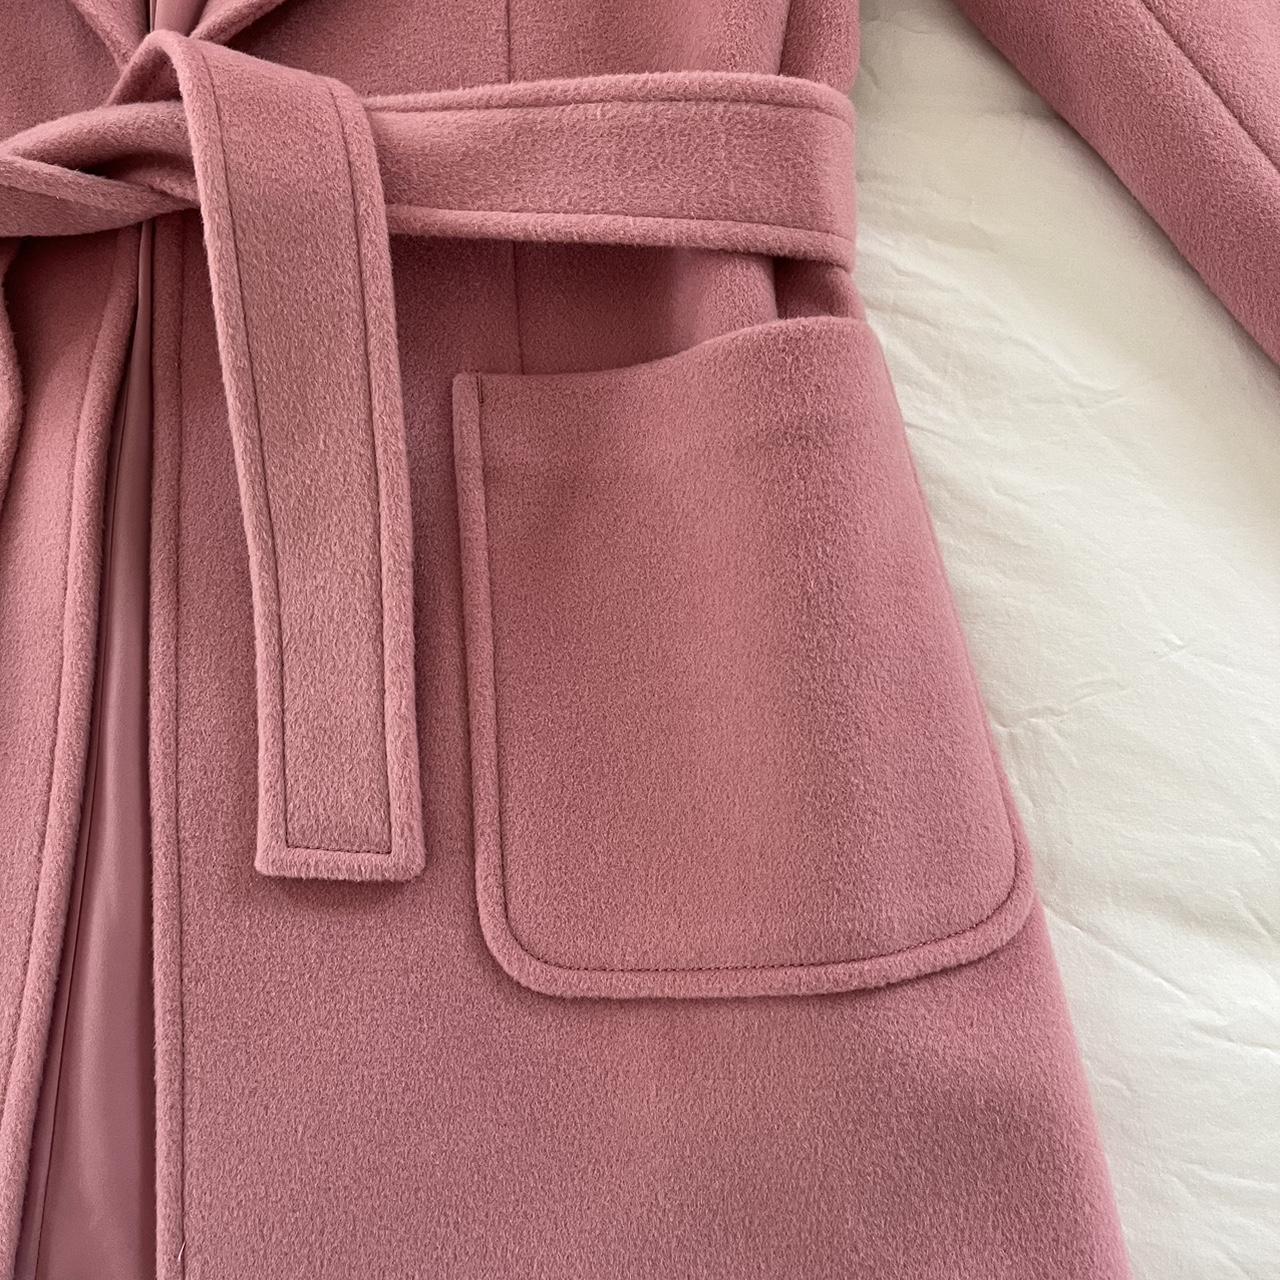 authentic vintage max and co pink coat, retail price... - Depop